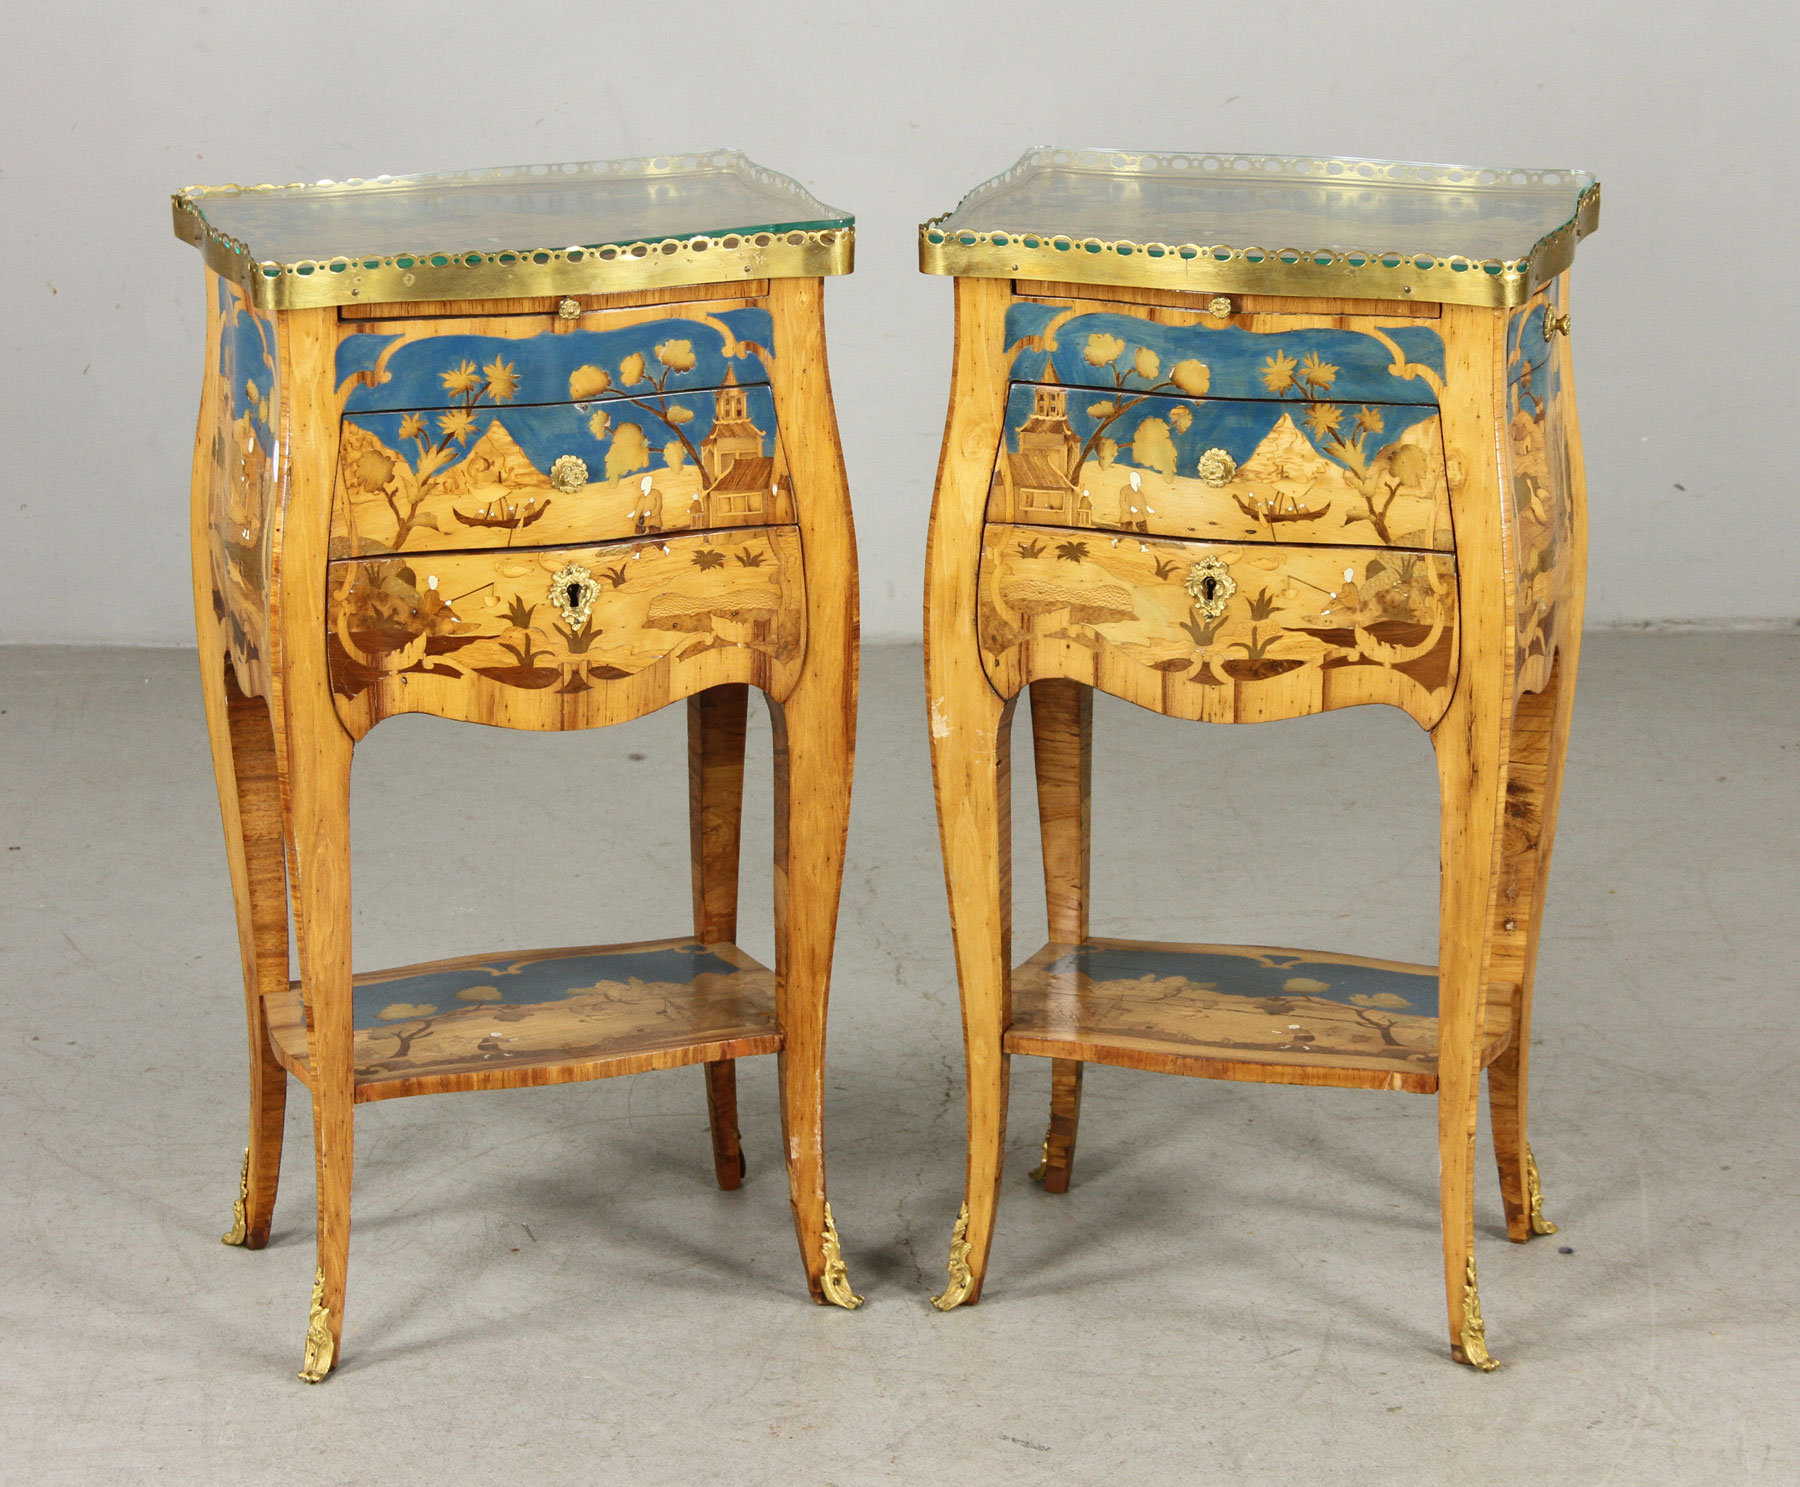 - Pair of unusual French tables, having elaborate marquetry inlaid tops, drawers and shelves